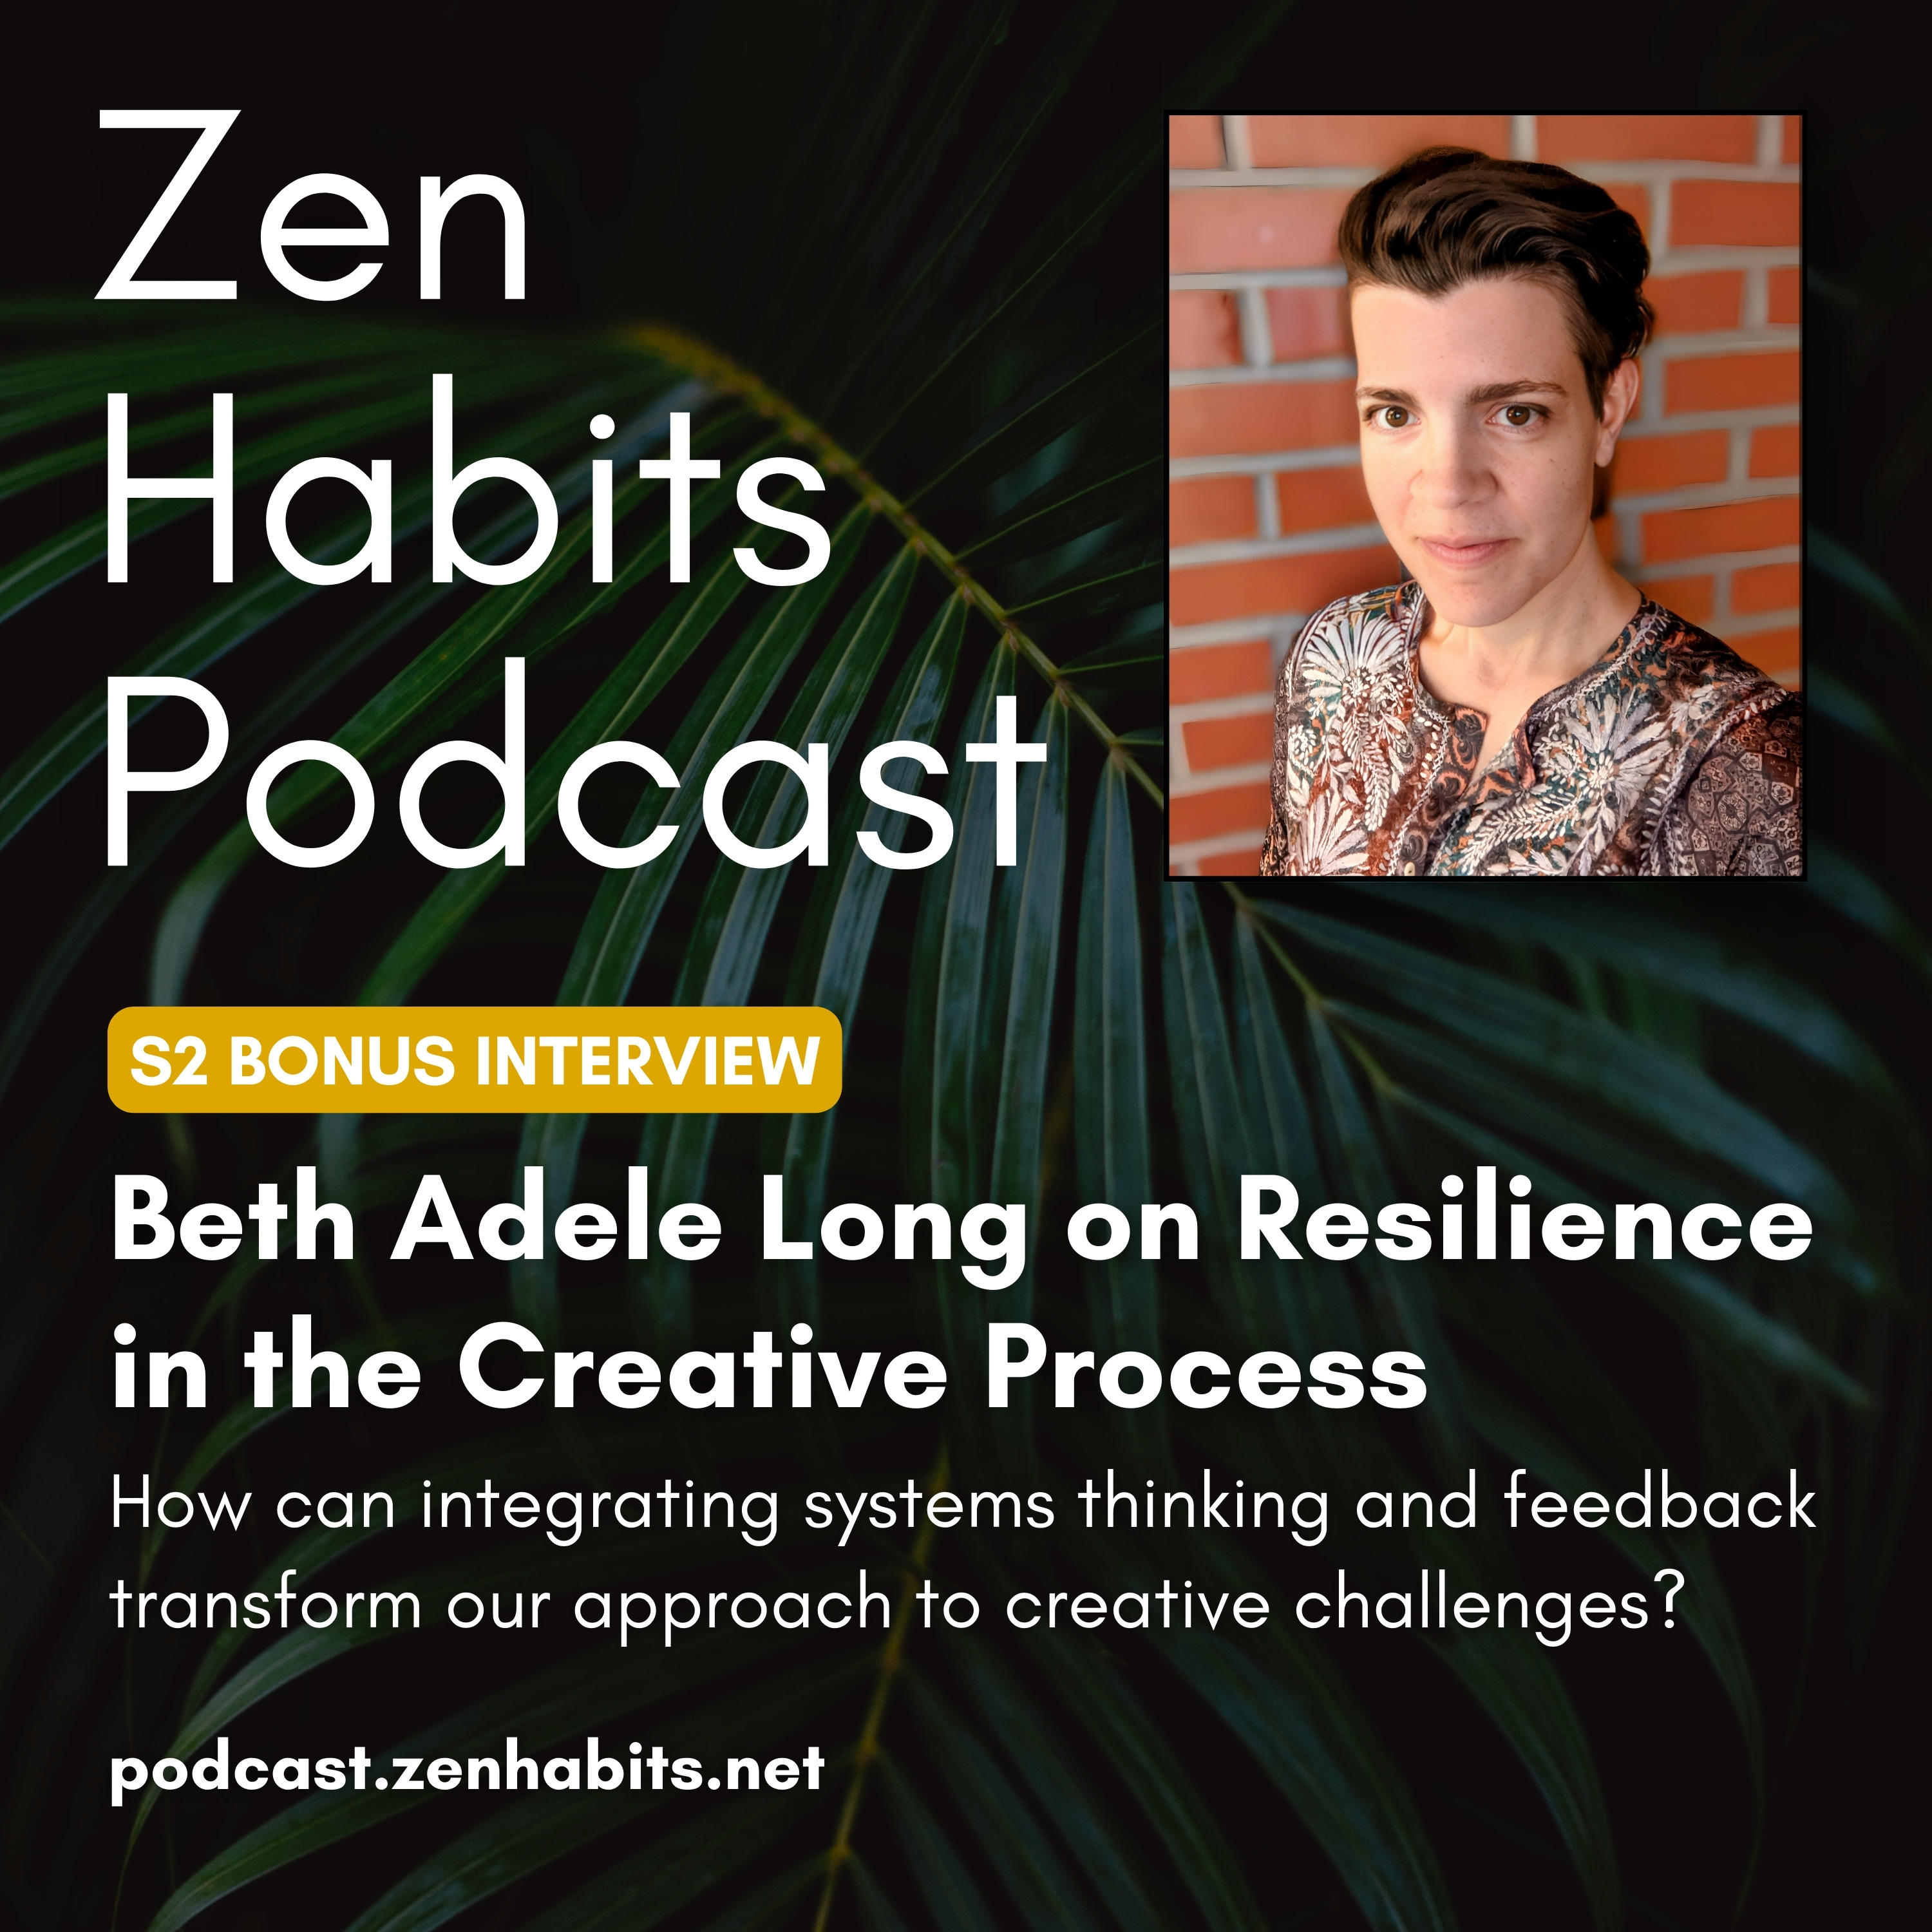 Beth Adele Long on Resilience in the Creative Process